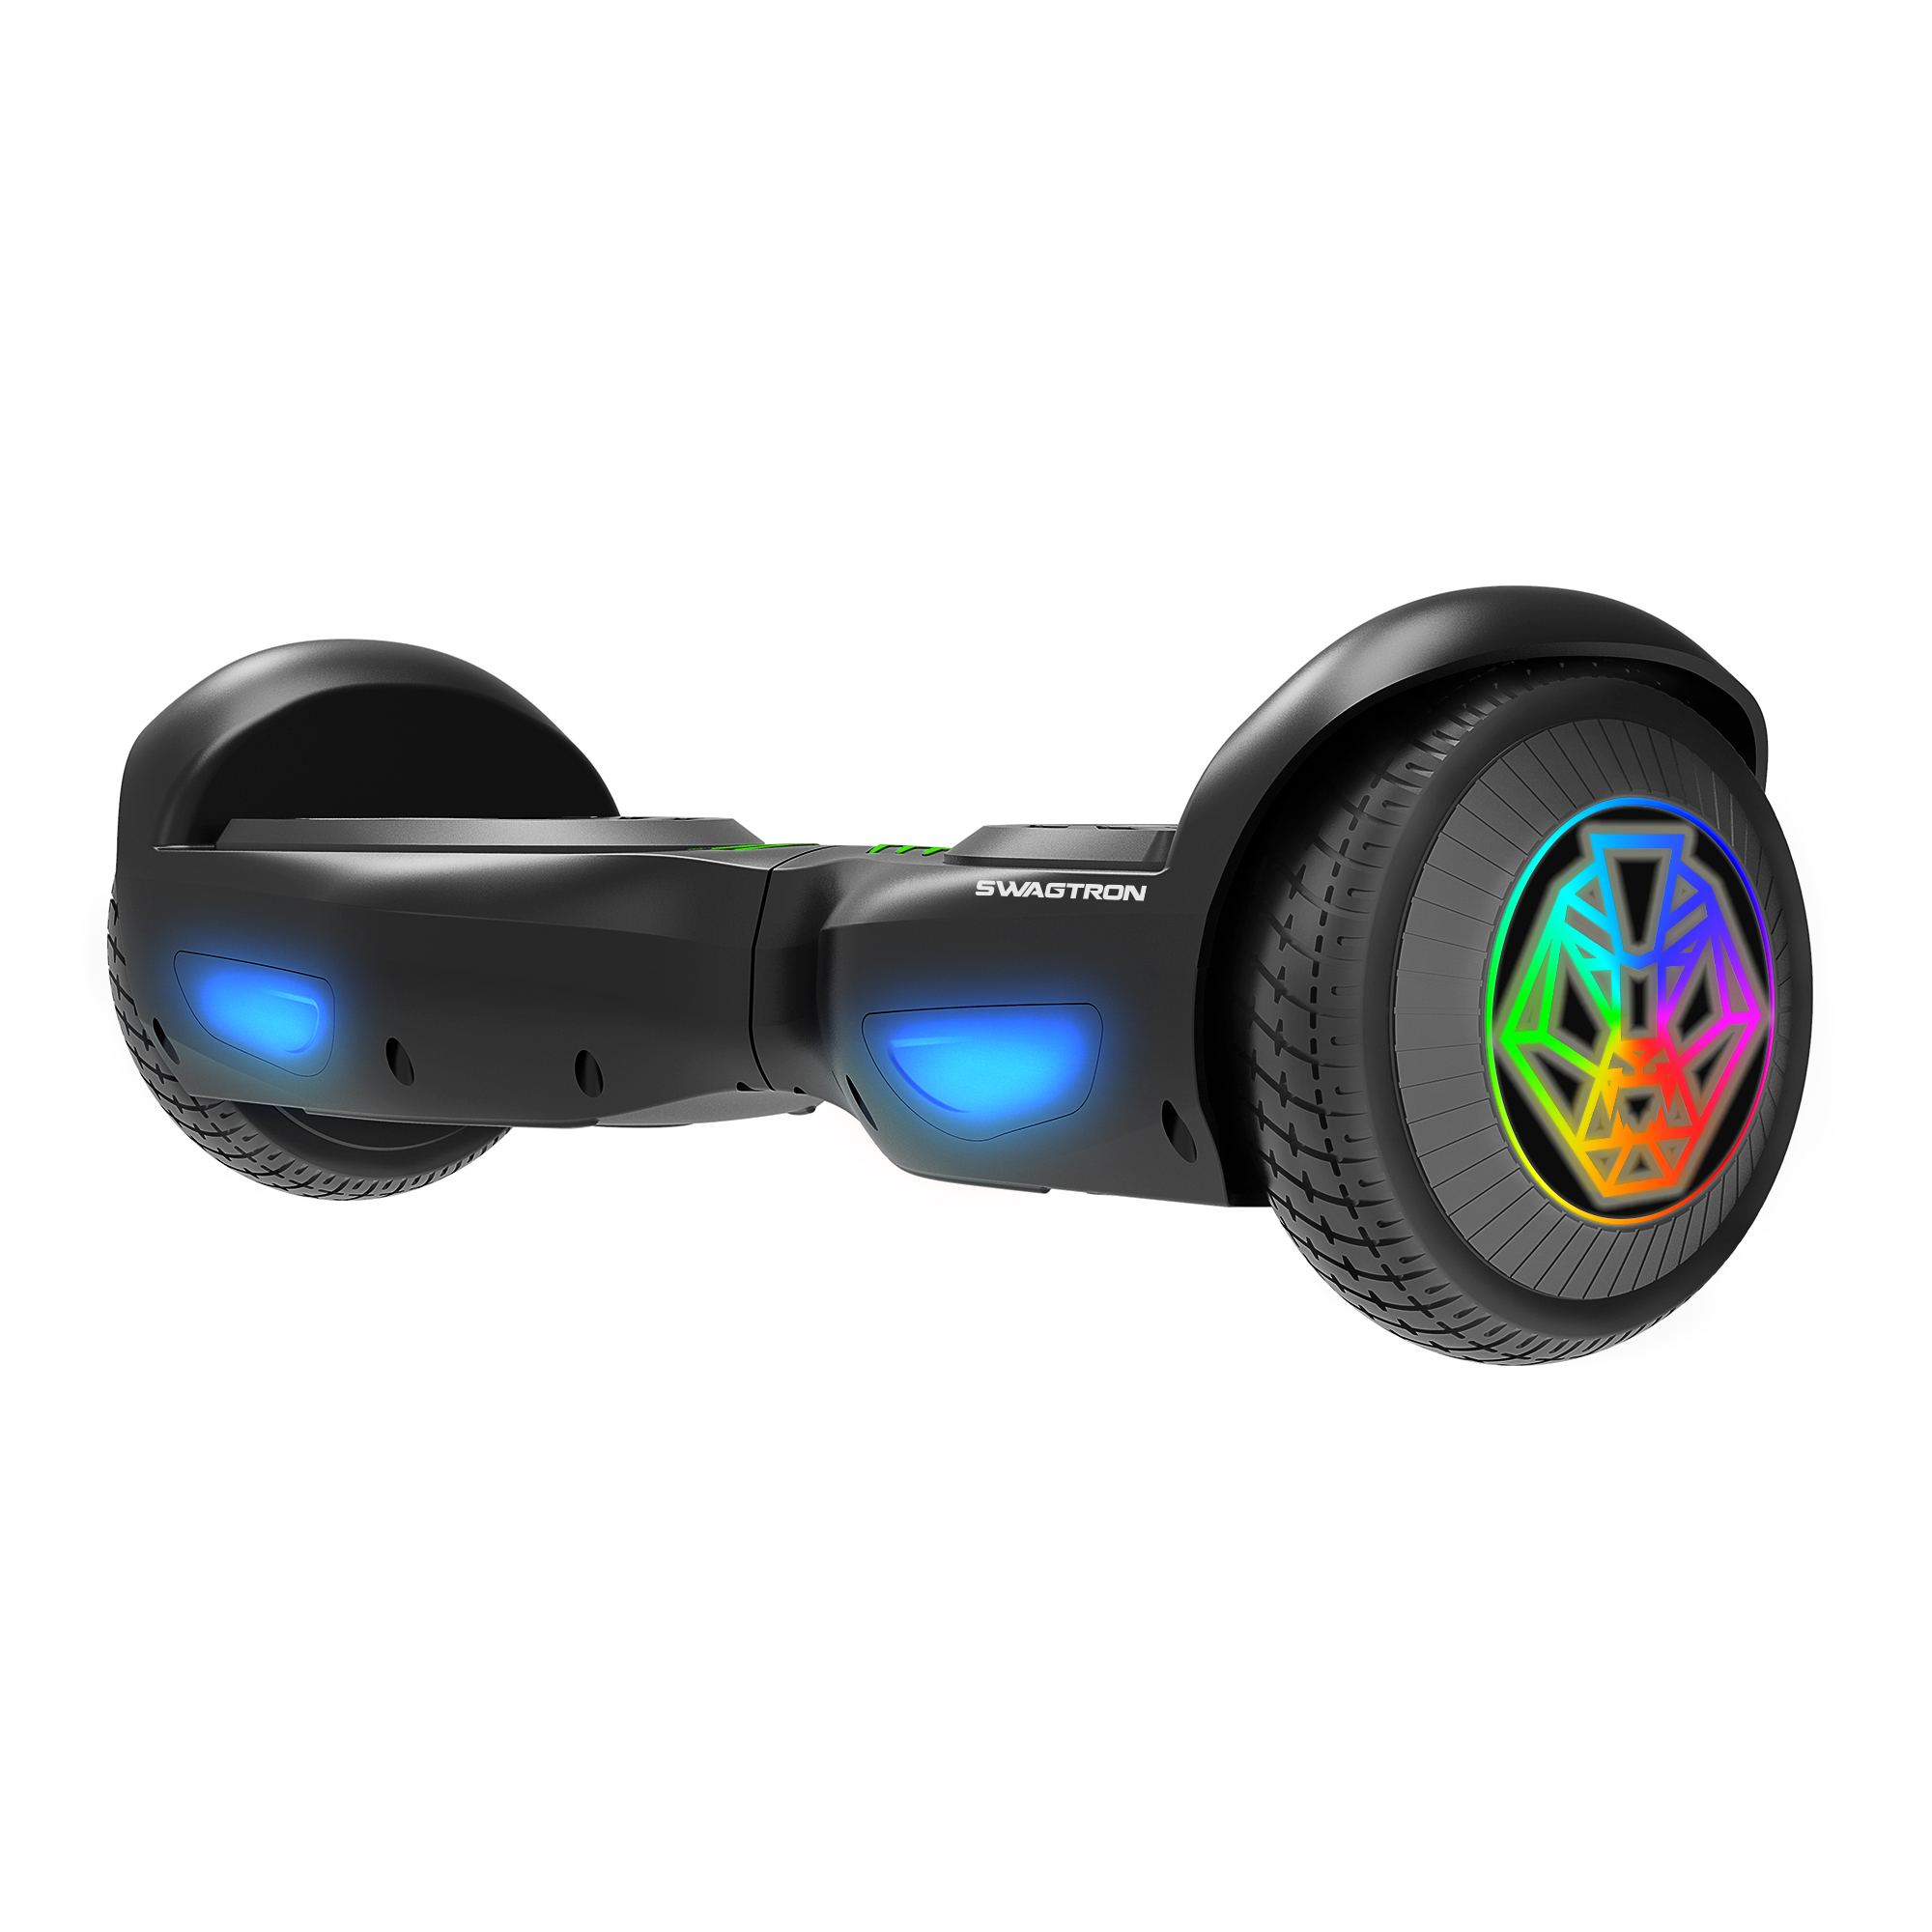 SWAGTRON's Two New Hoverboards for Kids Available Exclusively at Walmart